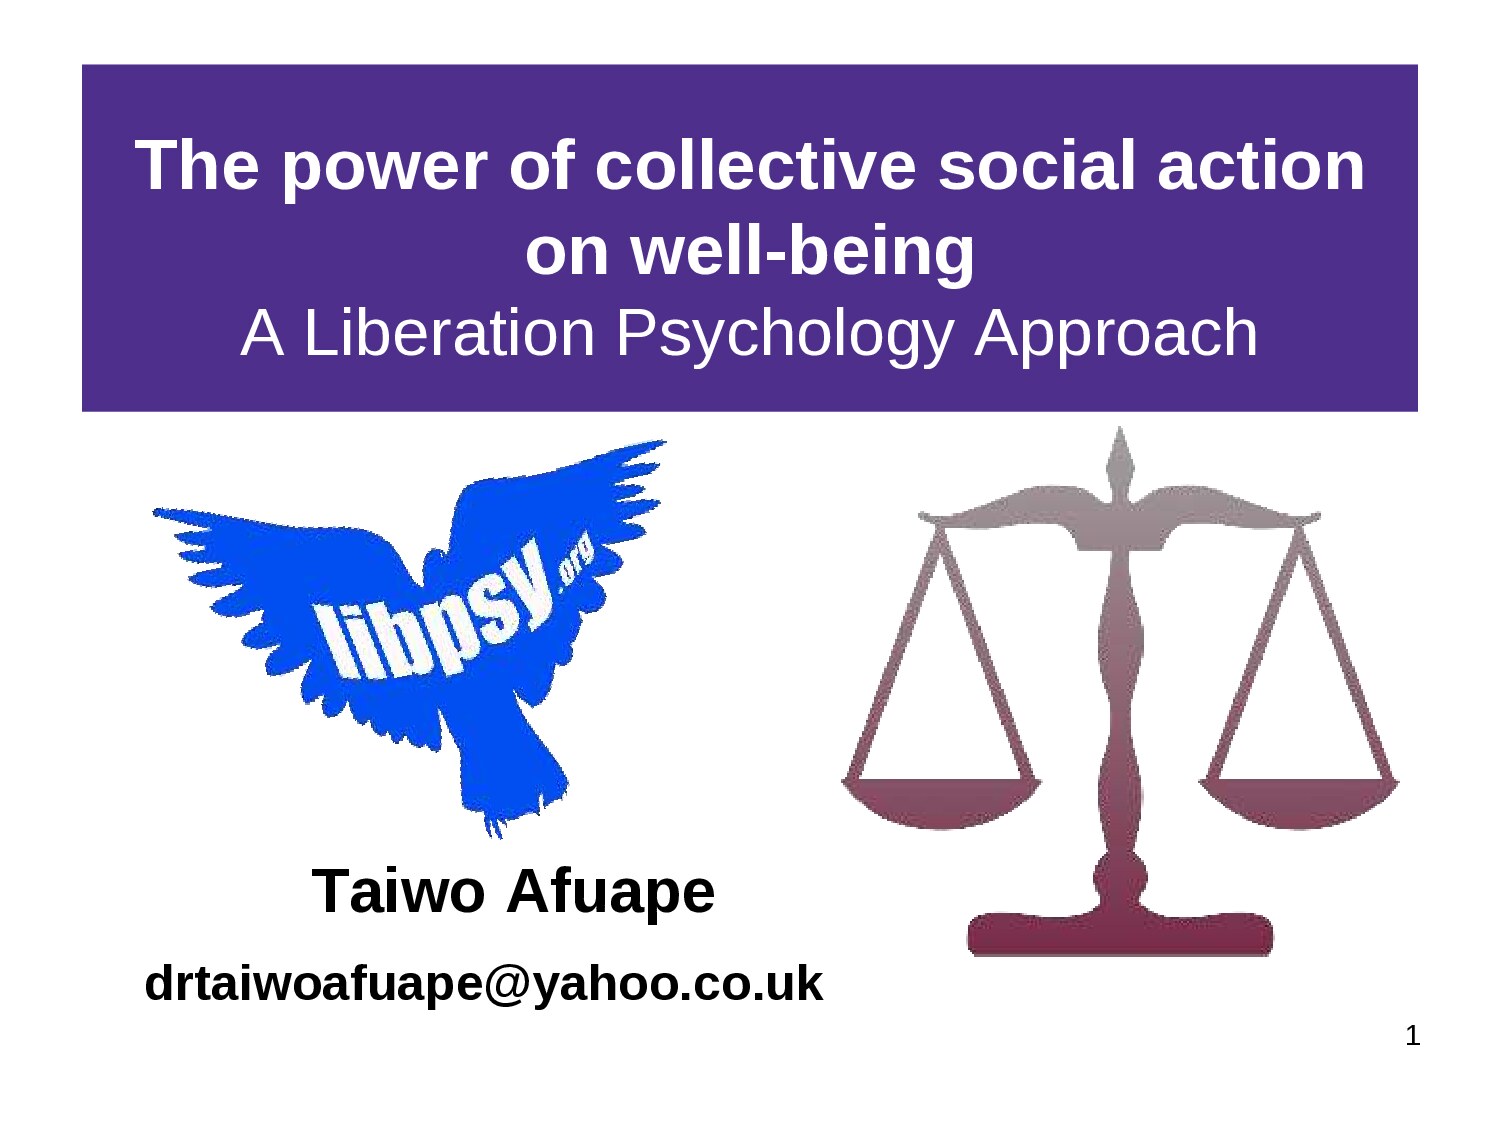 The power of collective social action on well-being: A Liberation Psychology Approach